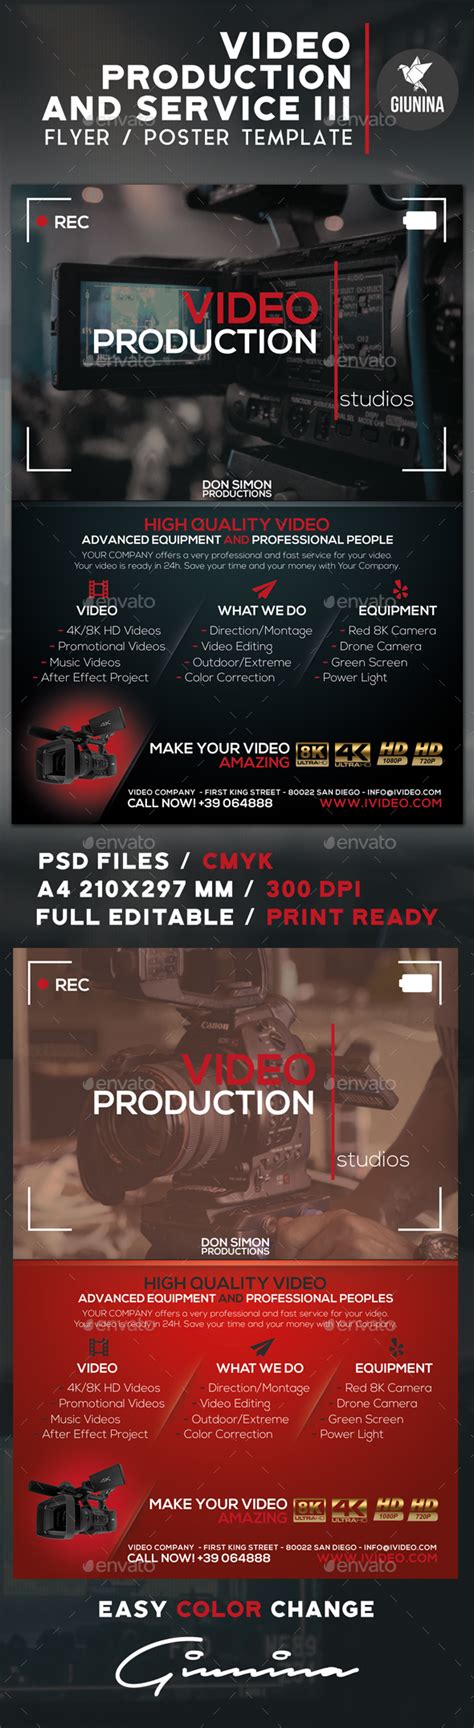 Video Production And Services 3 Flyerposter By Giunina Graphicriver